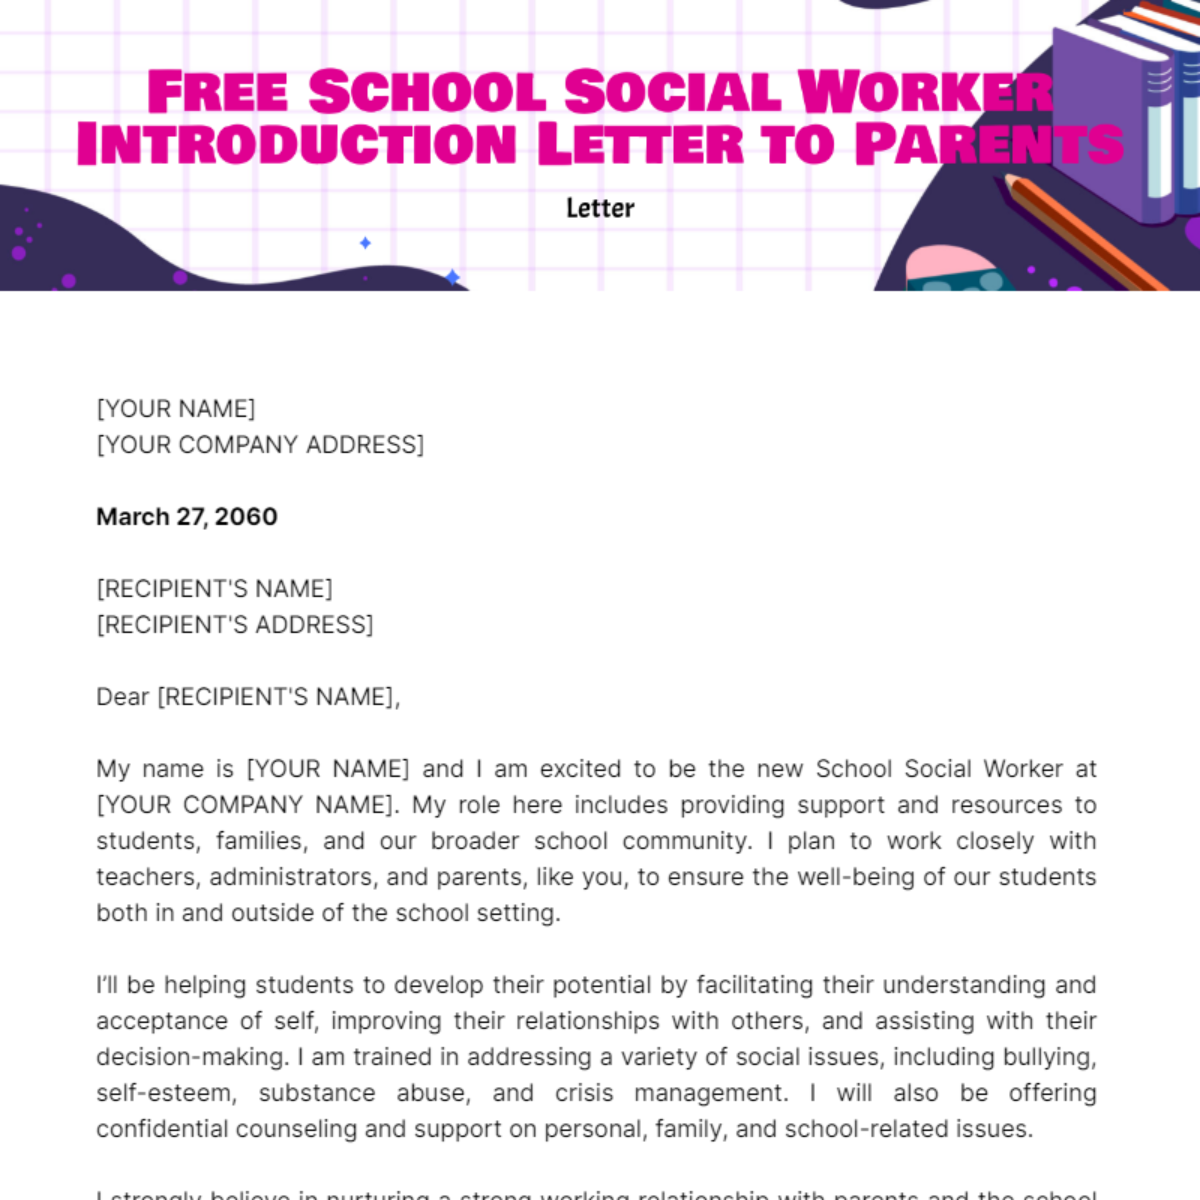 School Social Worker Introduction Letter to Parents Template